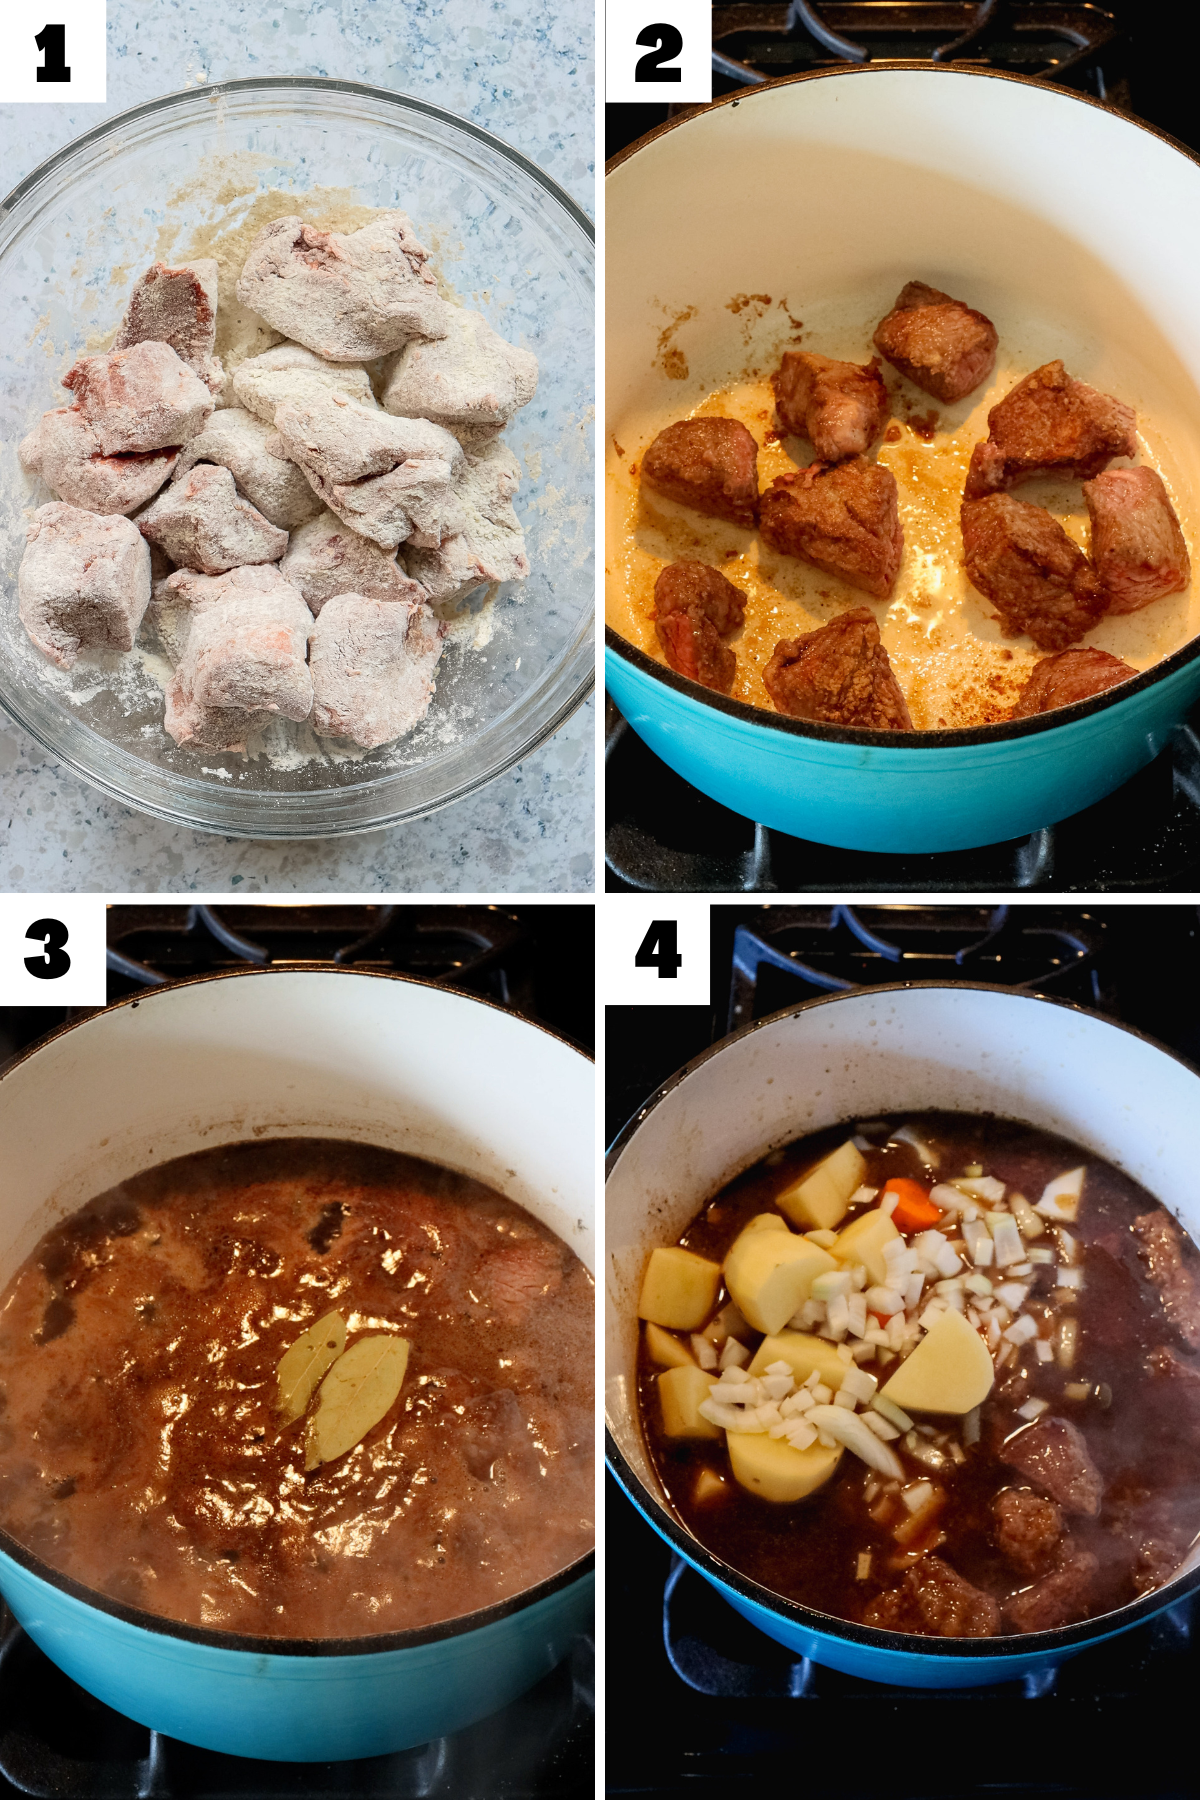 How to make beep stew in 4 steps